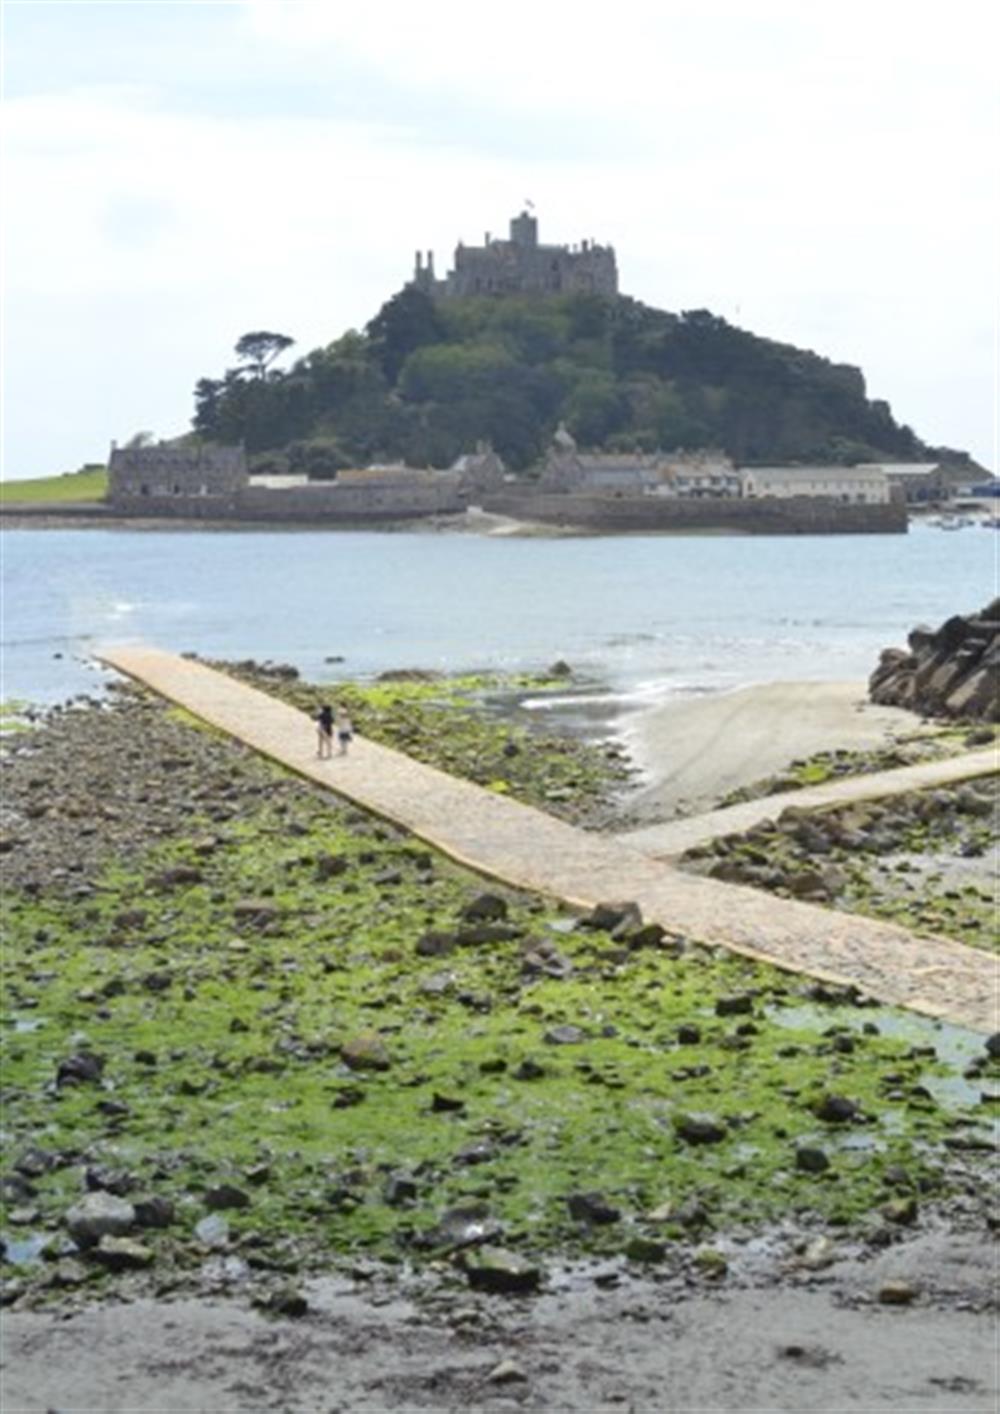 St Michael's Mount is just 45 minutes' away by car.